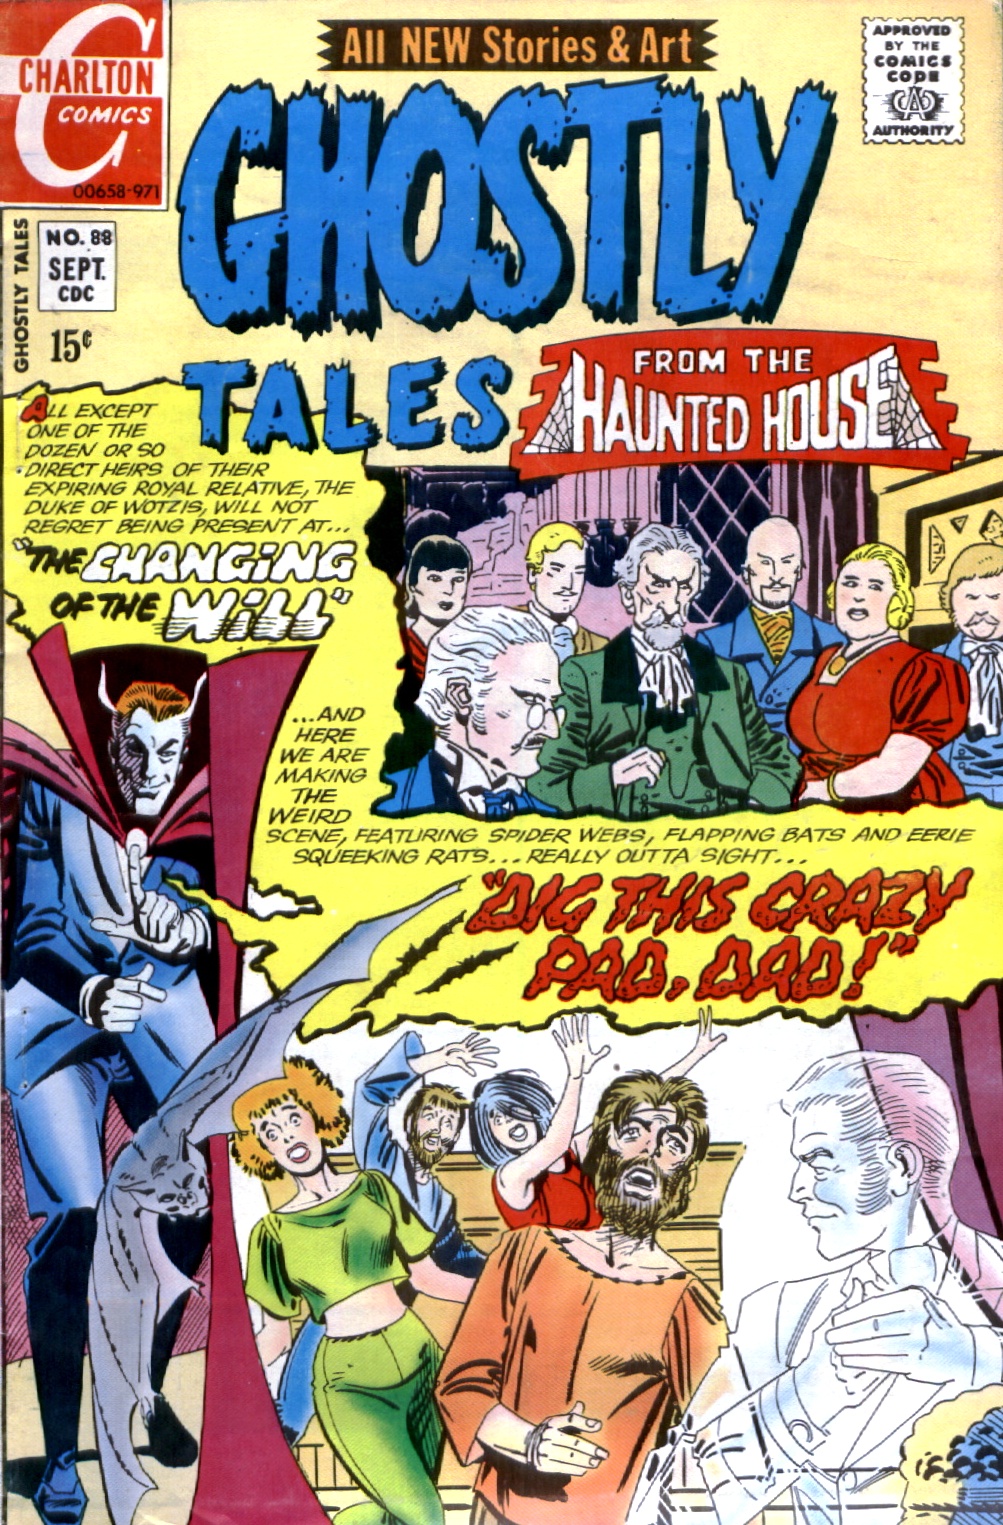 Read online Ghostly Tales comic -  Issue #88 - 1